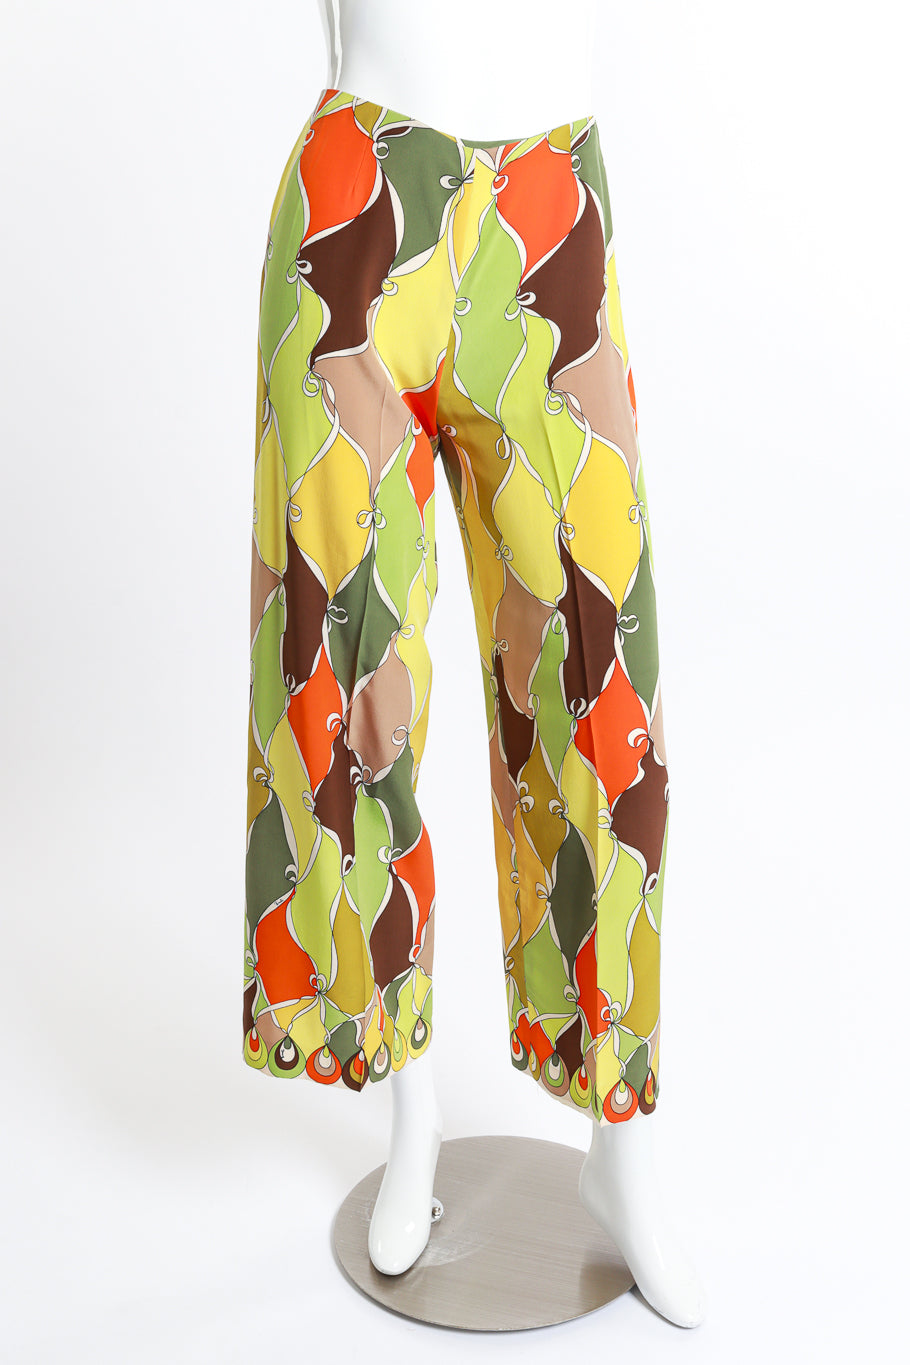 Vintage Emilio Pucci ruffle tunic high waisted trouser set front view of trousers as seen on mannequin @RECESS LA